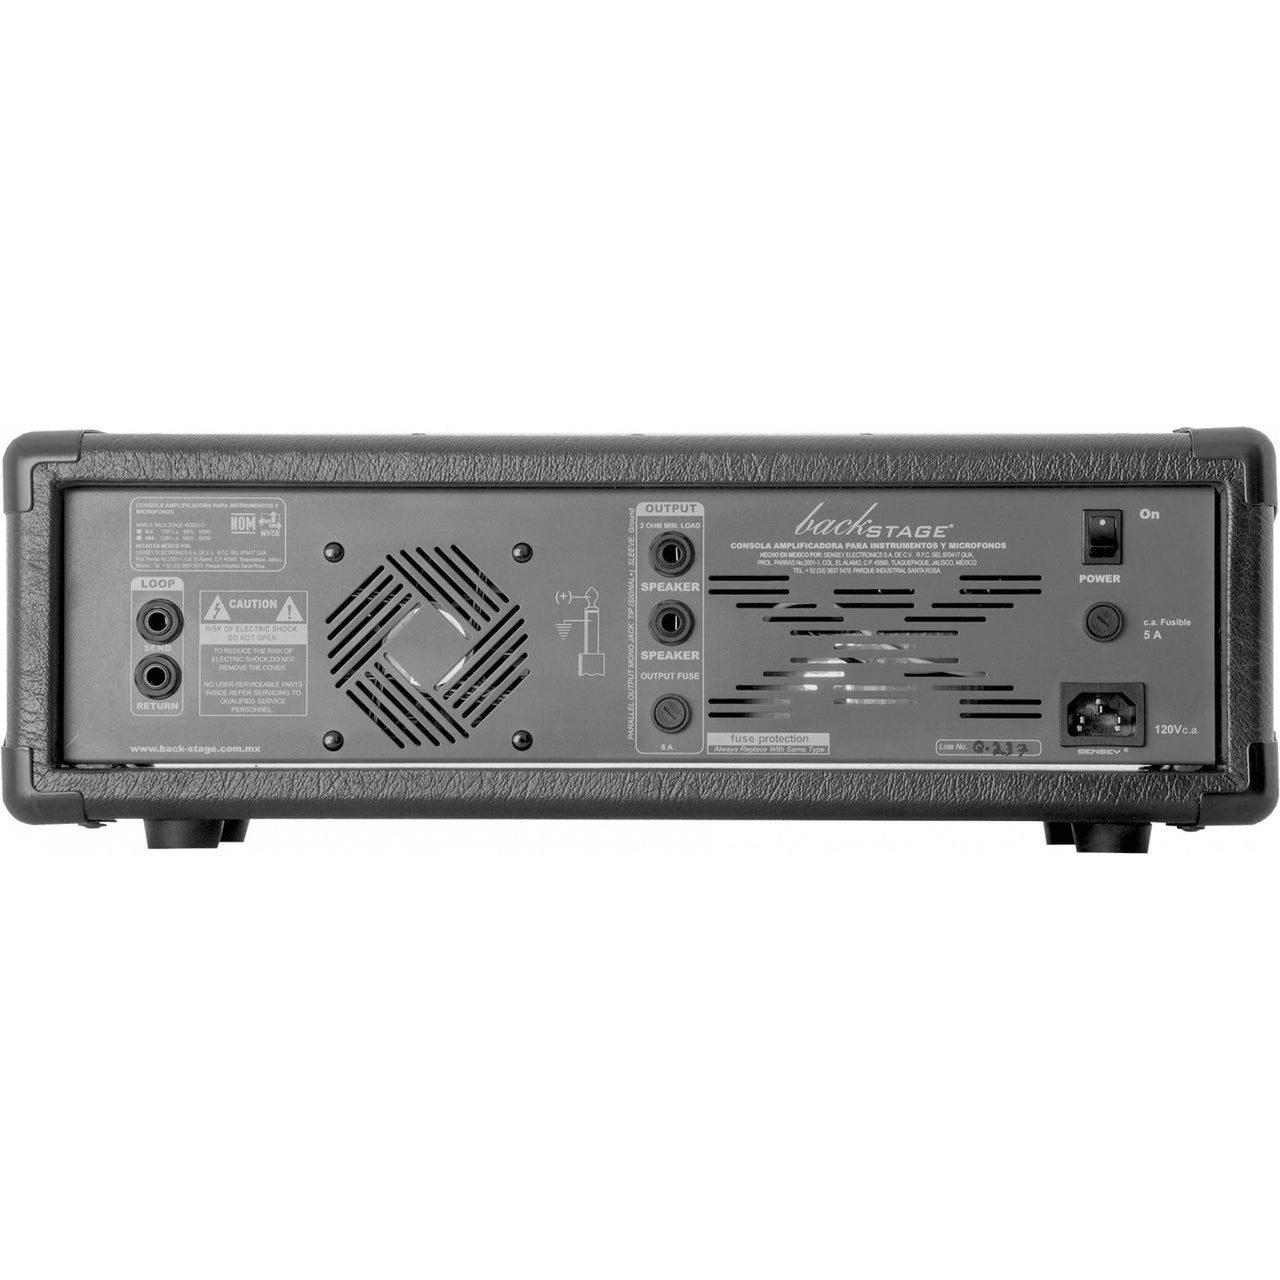 Consola Back-stage 4l4 Usb Para Lineas Y Microfono 4 Canales